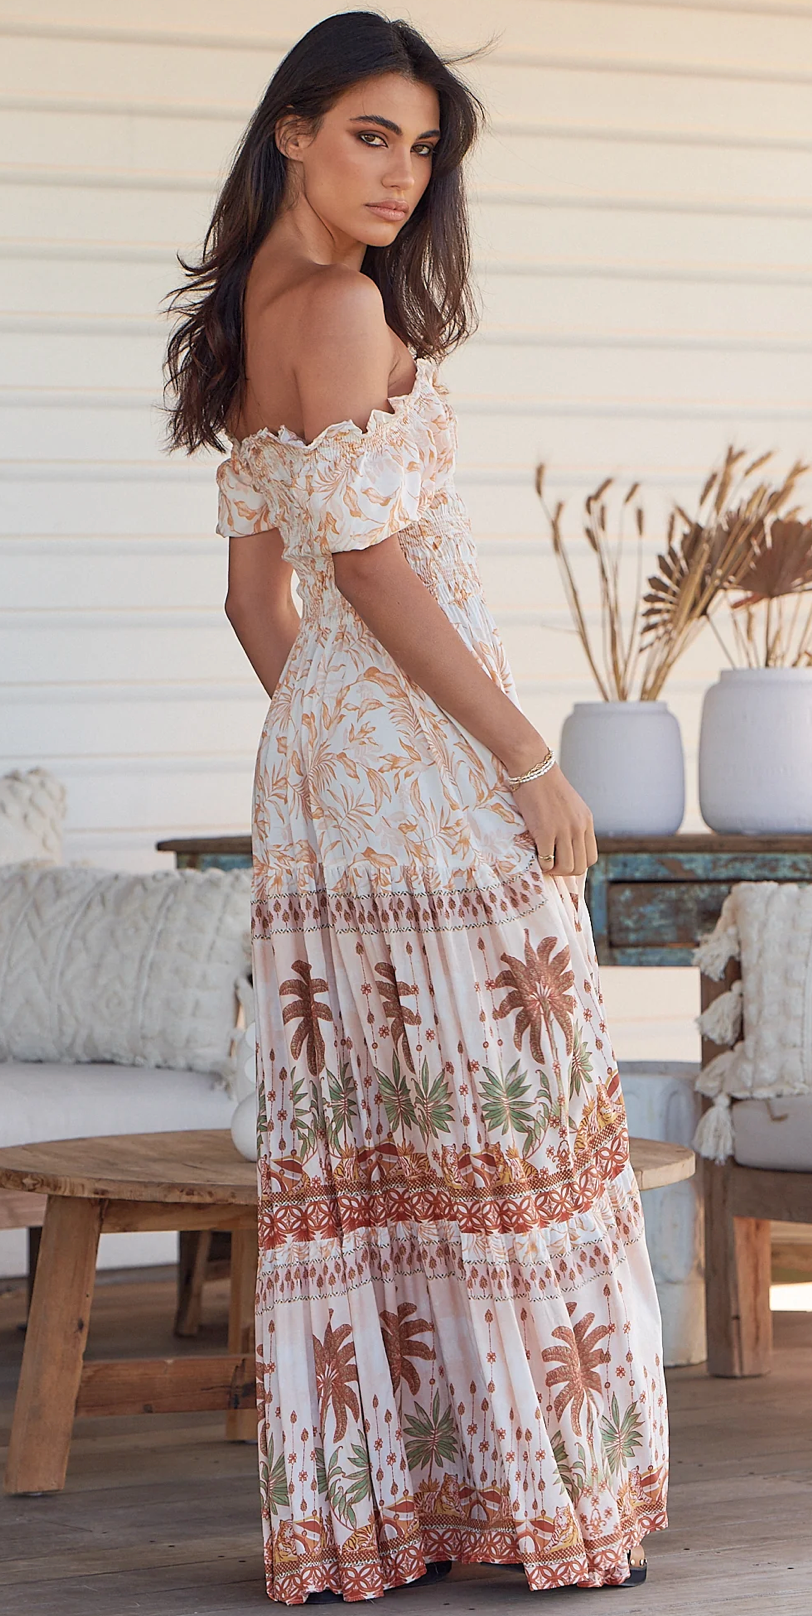 Unleash your inner flower child with the Claudette Maxi Dress in Yasmina! This flowy and floral off-the-shoulder dress is perfect for a bohemian-inspired look. The elastic cuffs offer a comfortable fit while the maxi length adds a touch of elegance. Perfect for any summer event. (No flower crown necessary.)